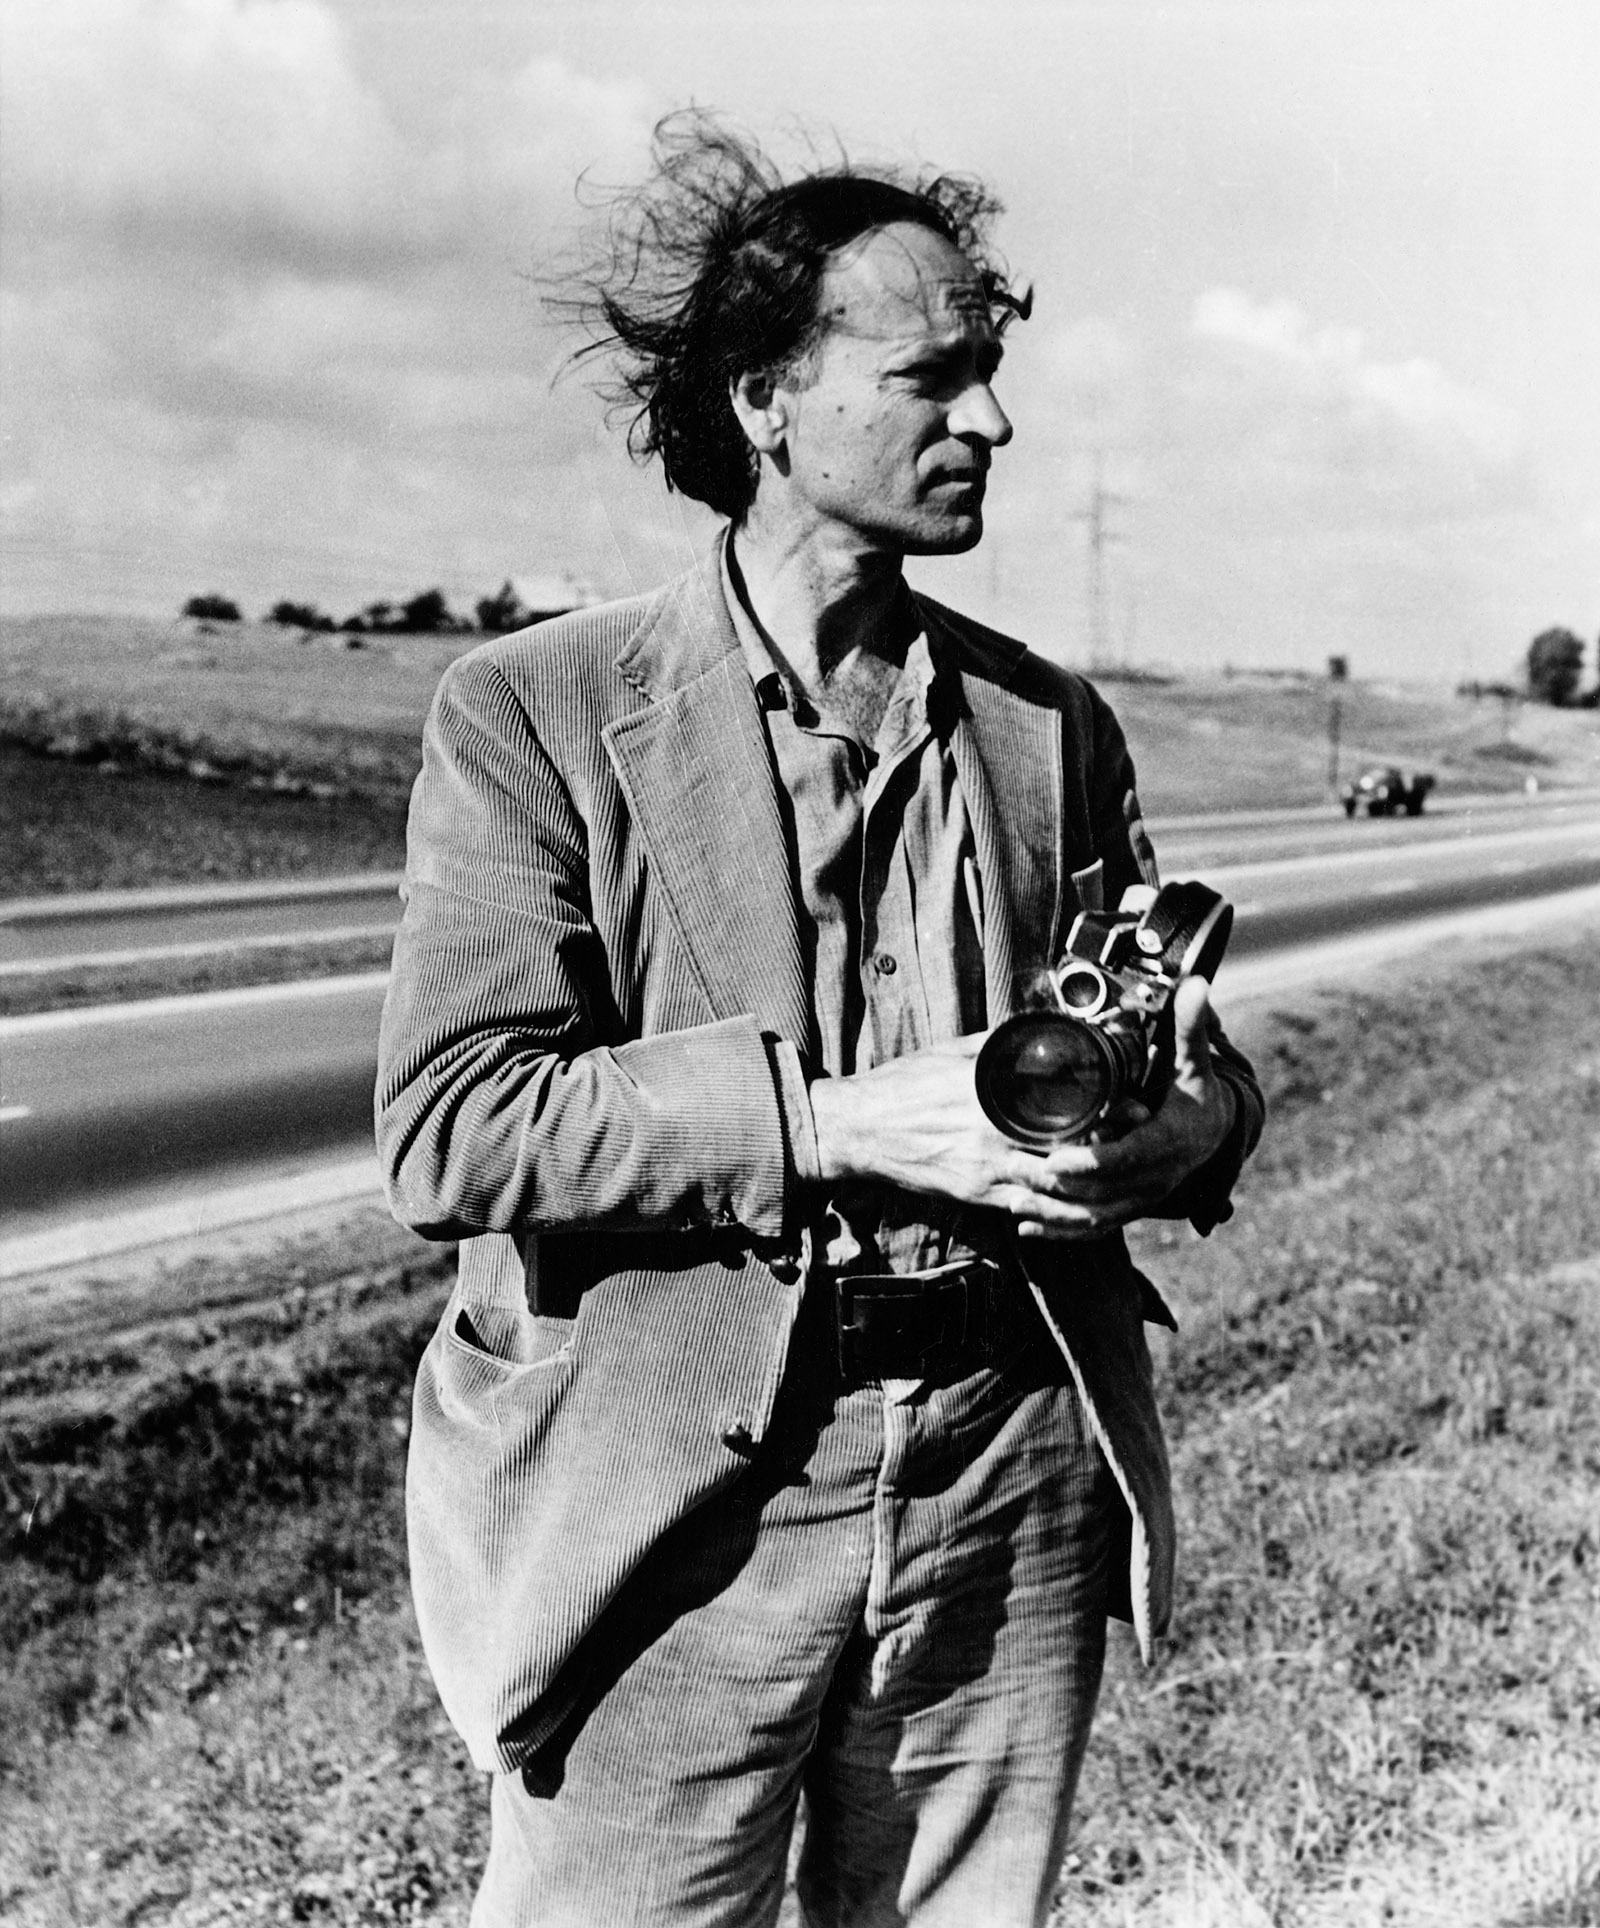 Jonas Mekas in Lithuania, 1971; photographs from A Dance with Fred Astaire